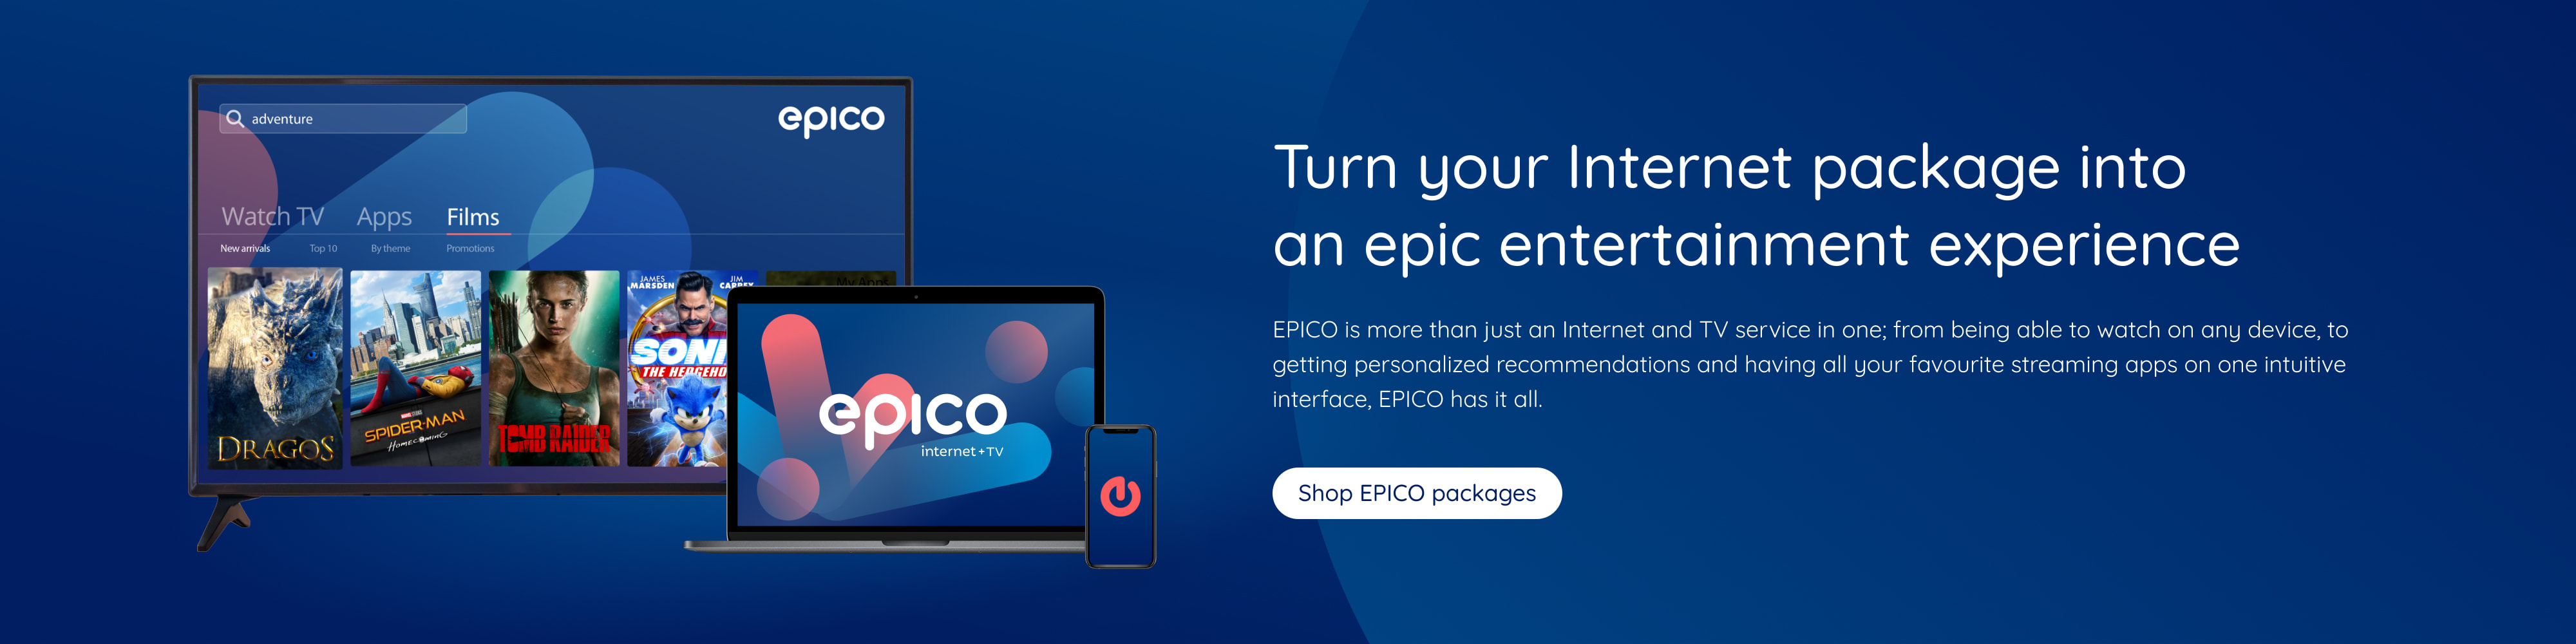 Turn your Internet package into an epic entertainment experience EPICO is more than just an Internet and TV service in one; from being able to watch on any device, to getting personalized recommendations and having all your favourite streaming apps on one intuitive interface, EPICO has it all. Shop EPICO packages